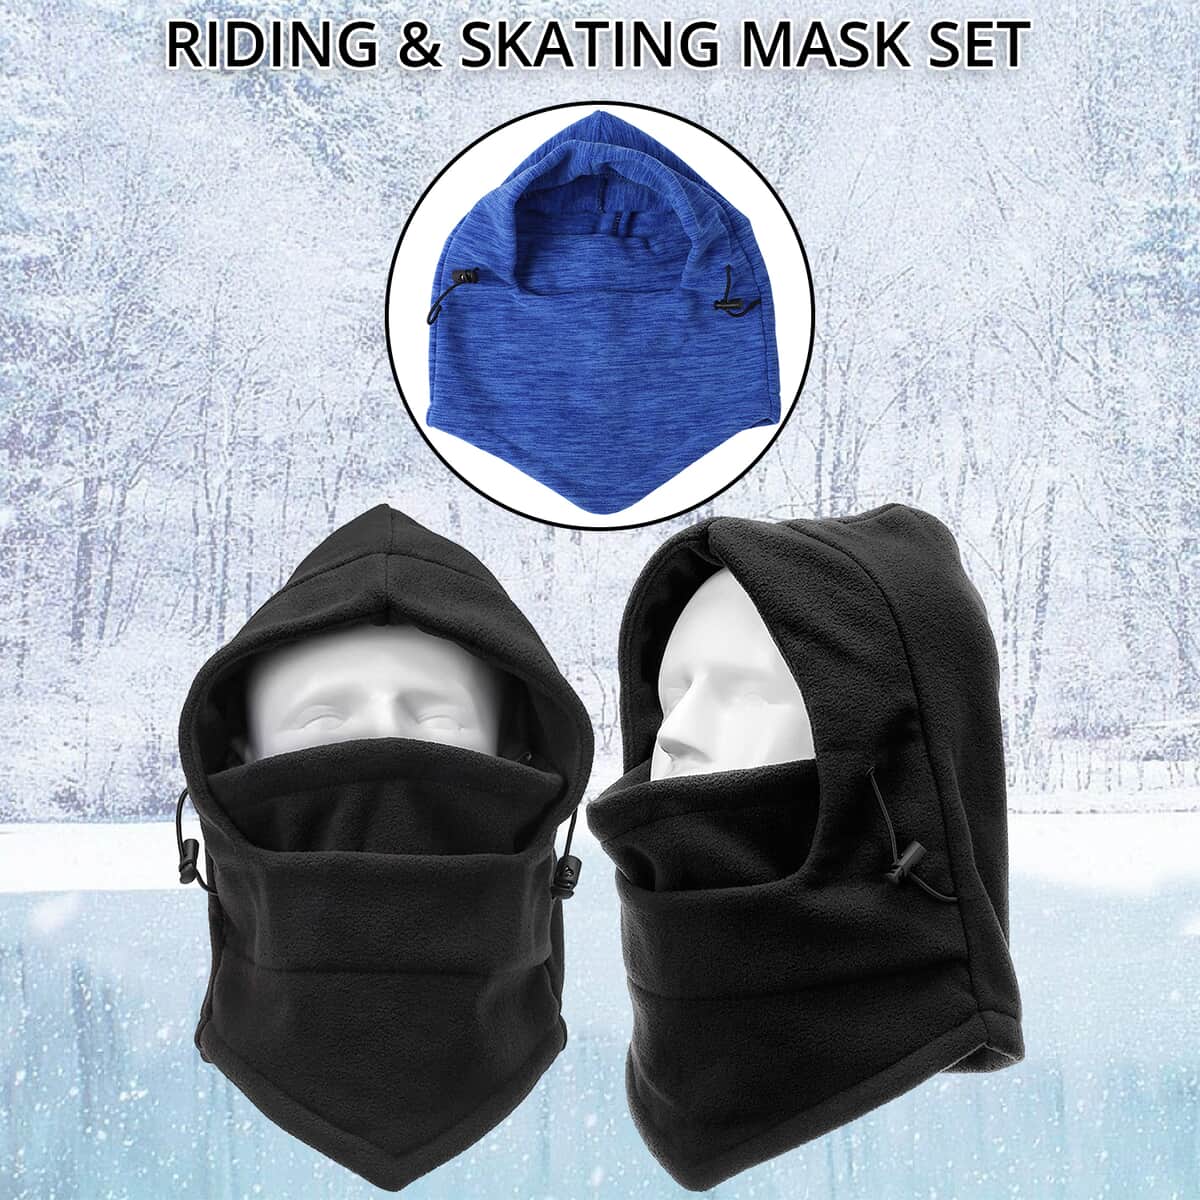 Set of 2 Black Windproof Riding and Skating Mask (11.5"x11.5") image number 1